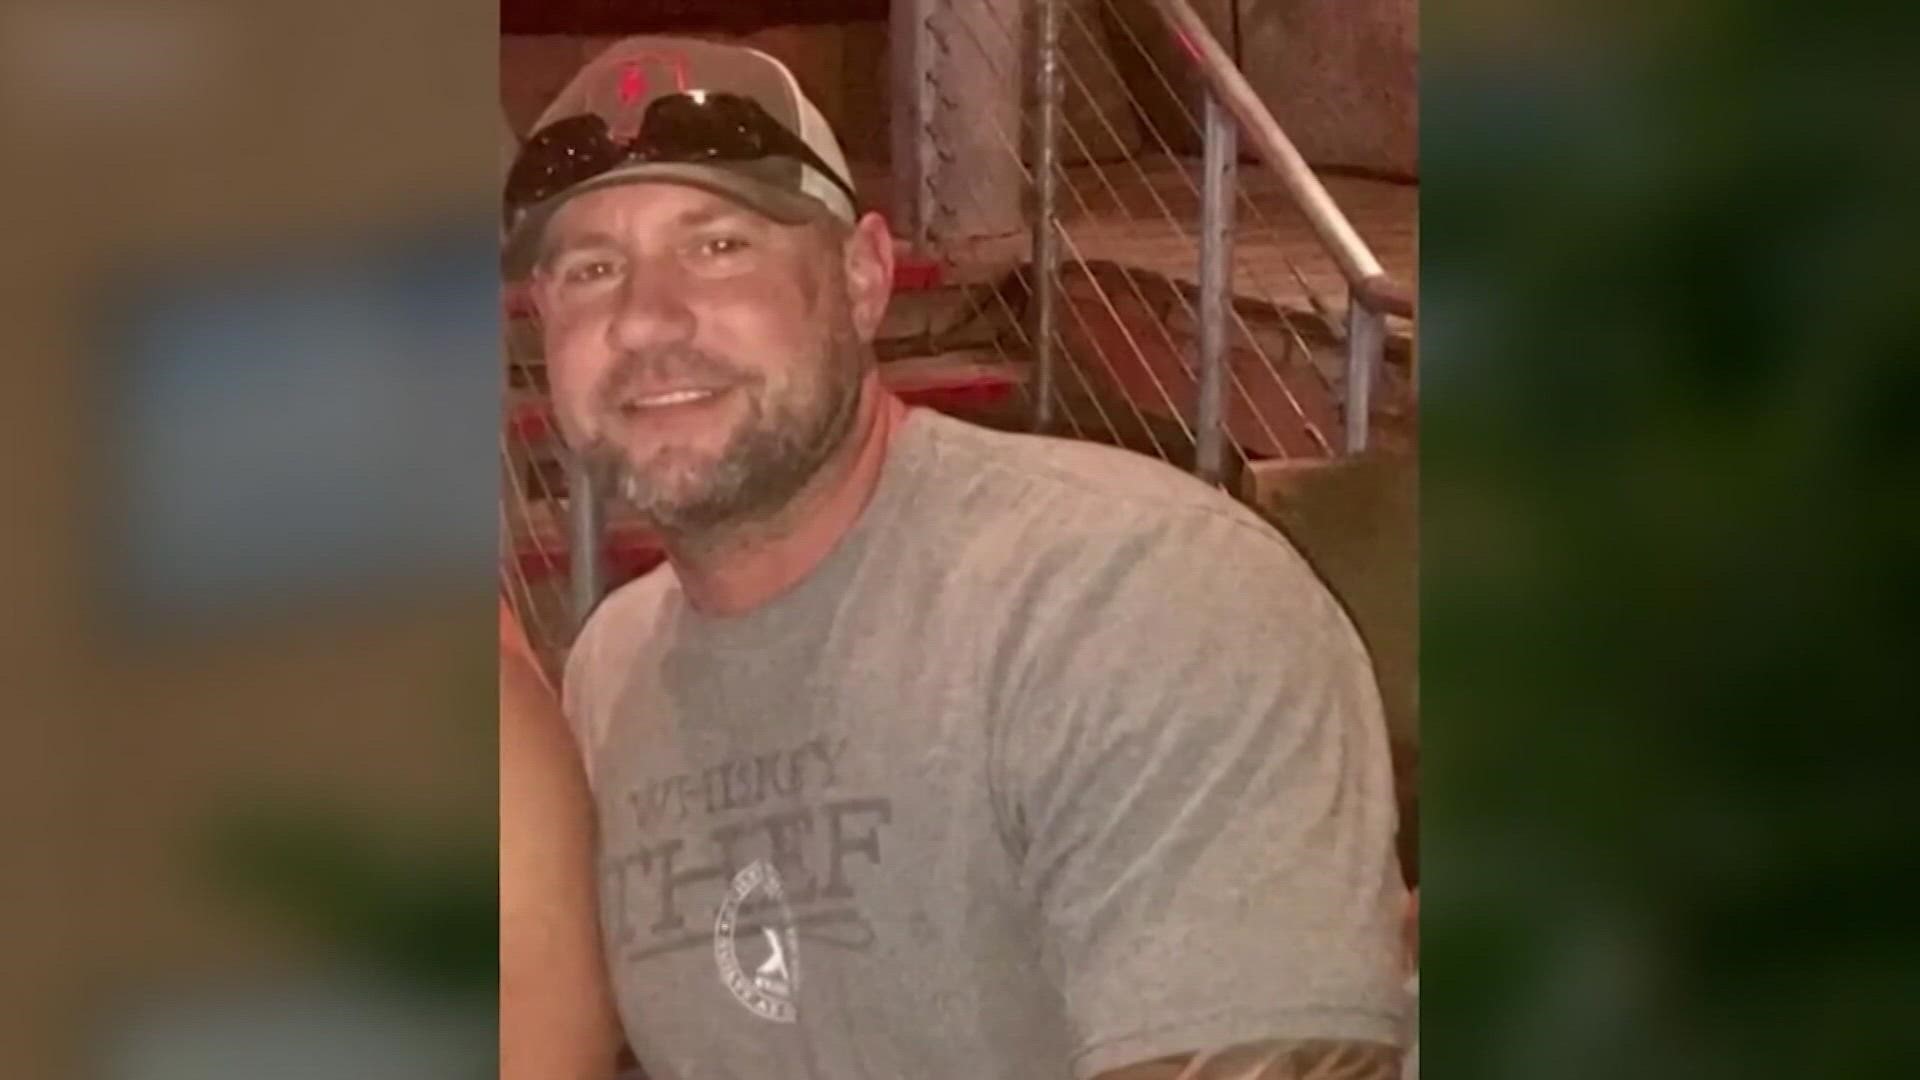 Garrett Hull was killed while investigating robbery suspects in Fort Worth in 2018.